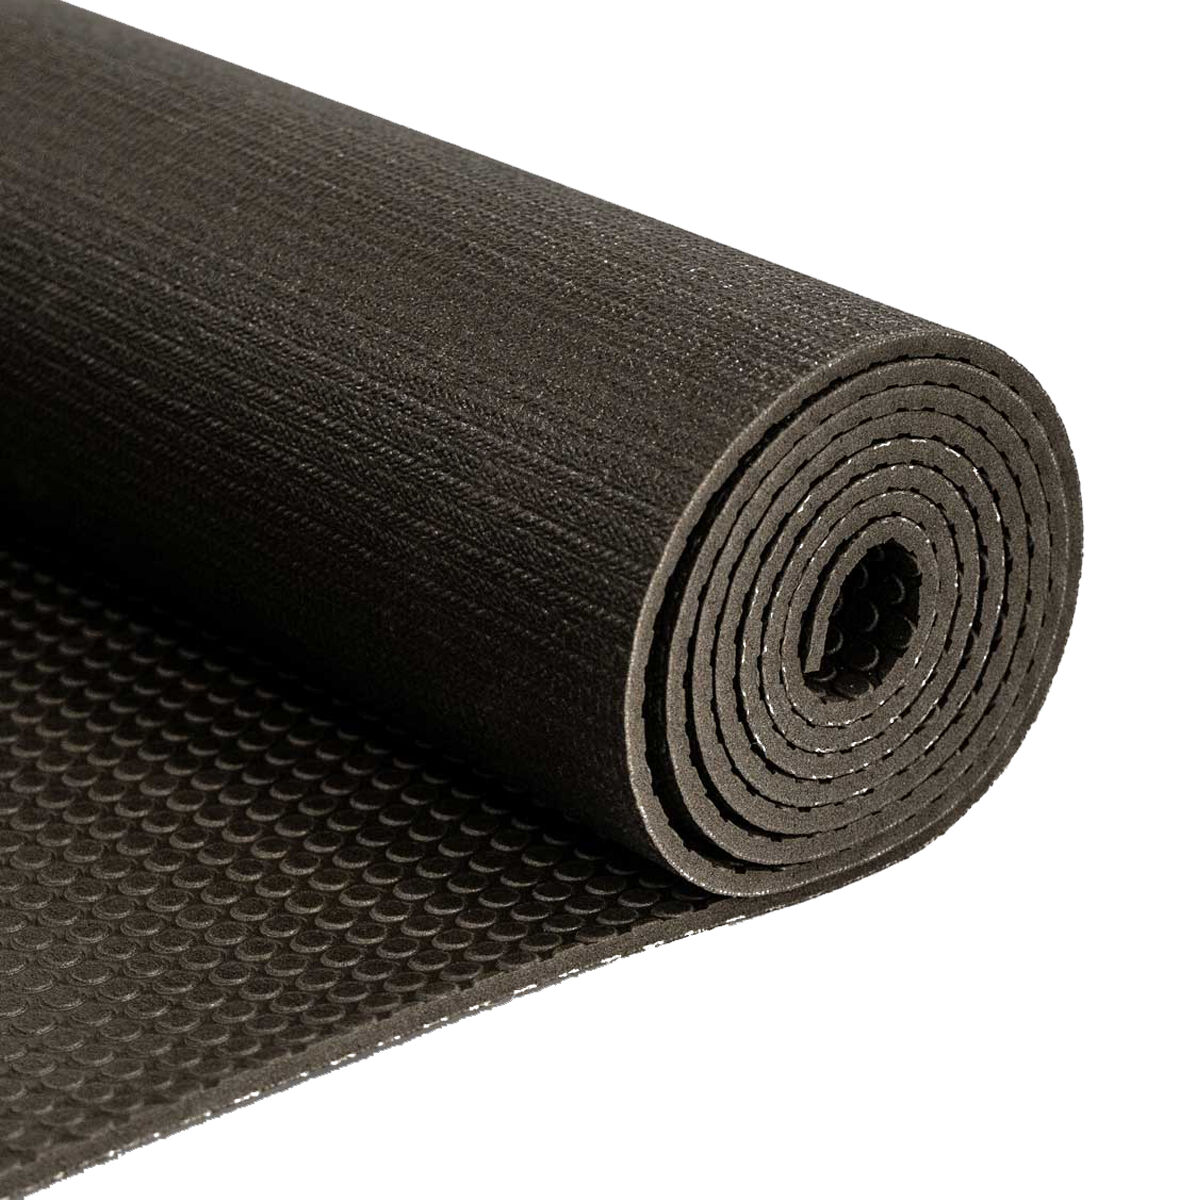 where to buy yoga mats in sydney